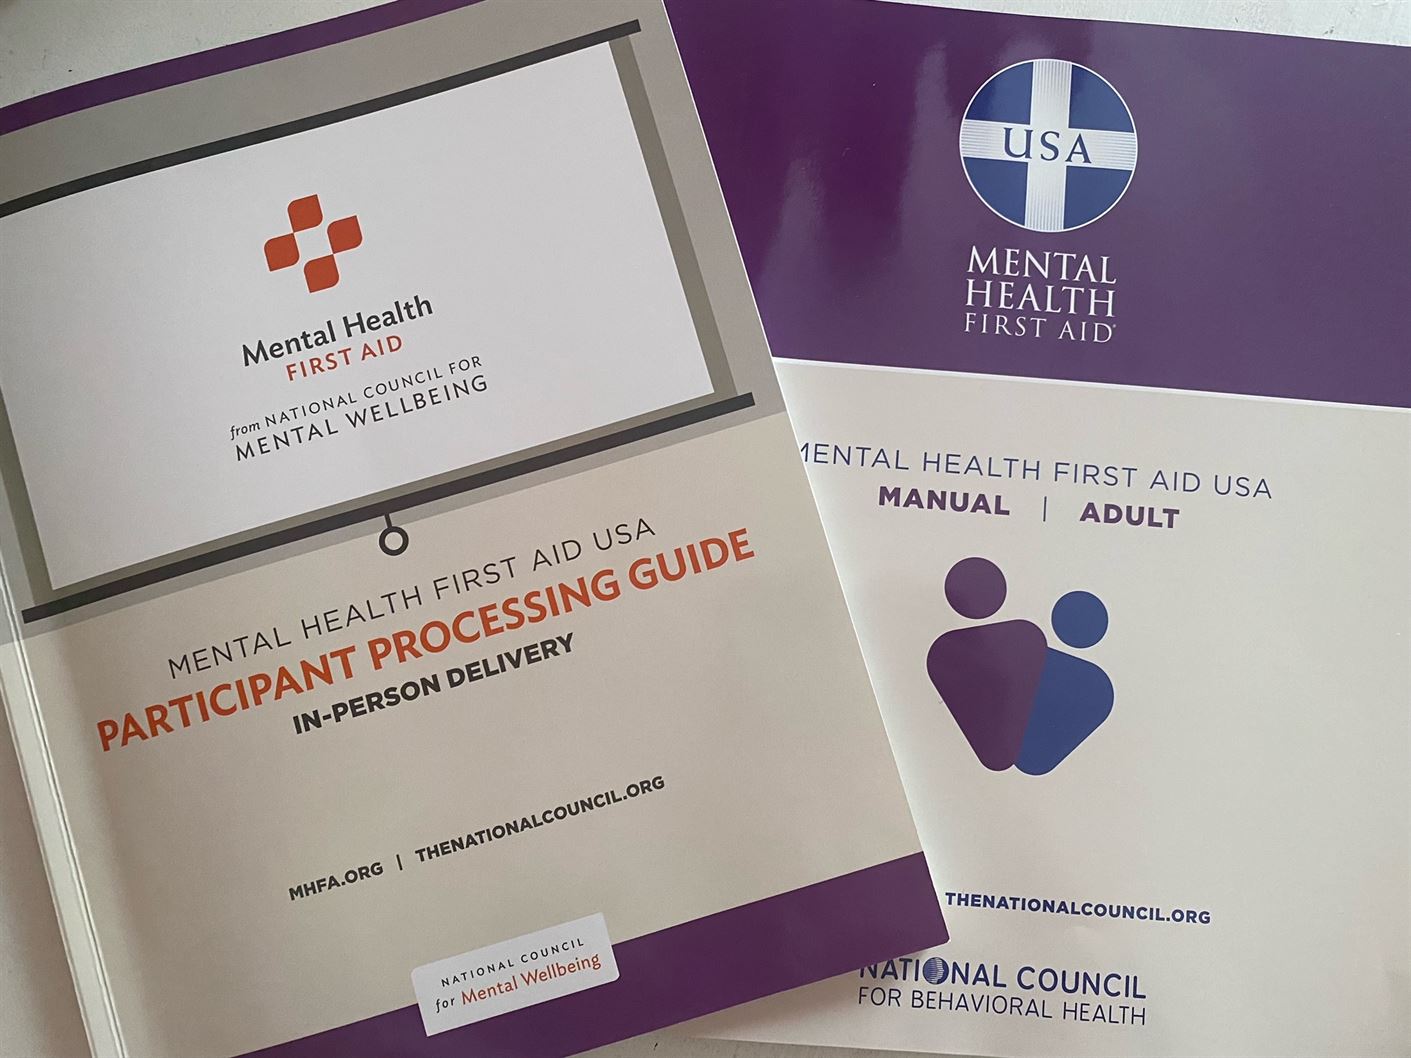 Students were given a Mental Health First Aid manual and wrote in their participant processing guides as they followed along with the lessons.